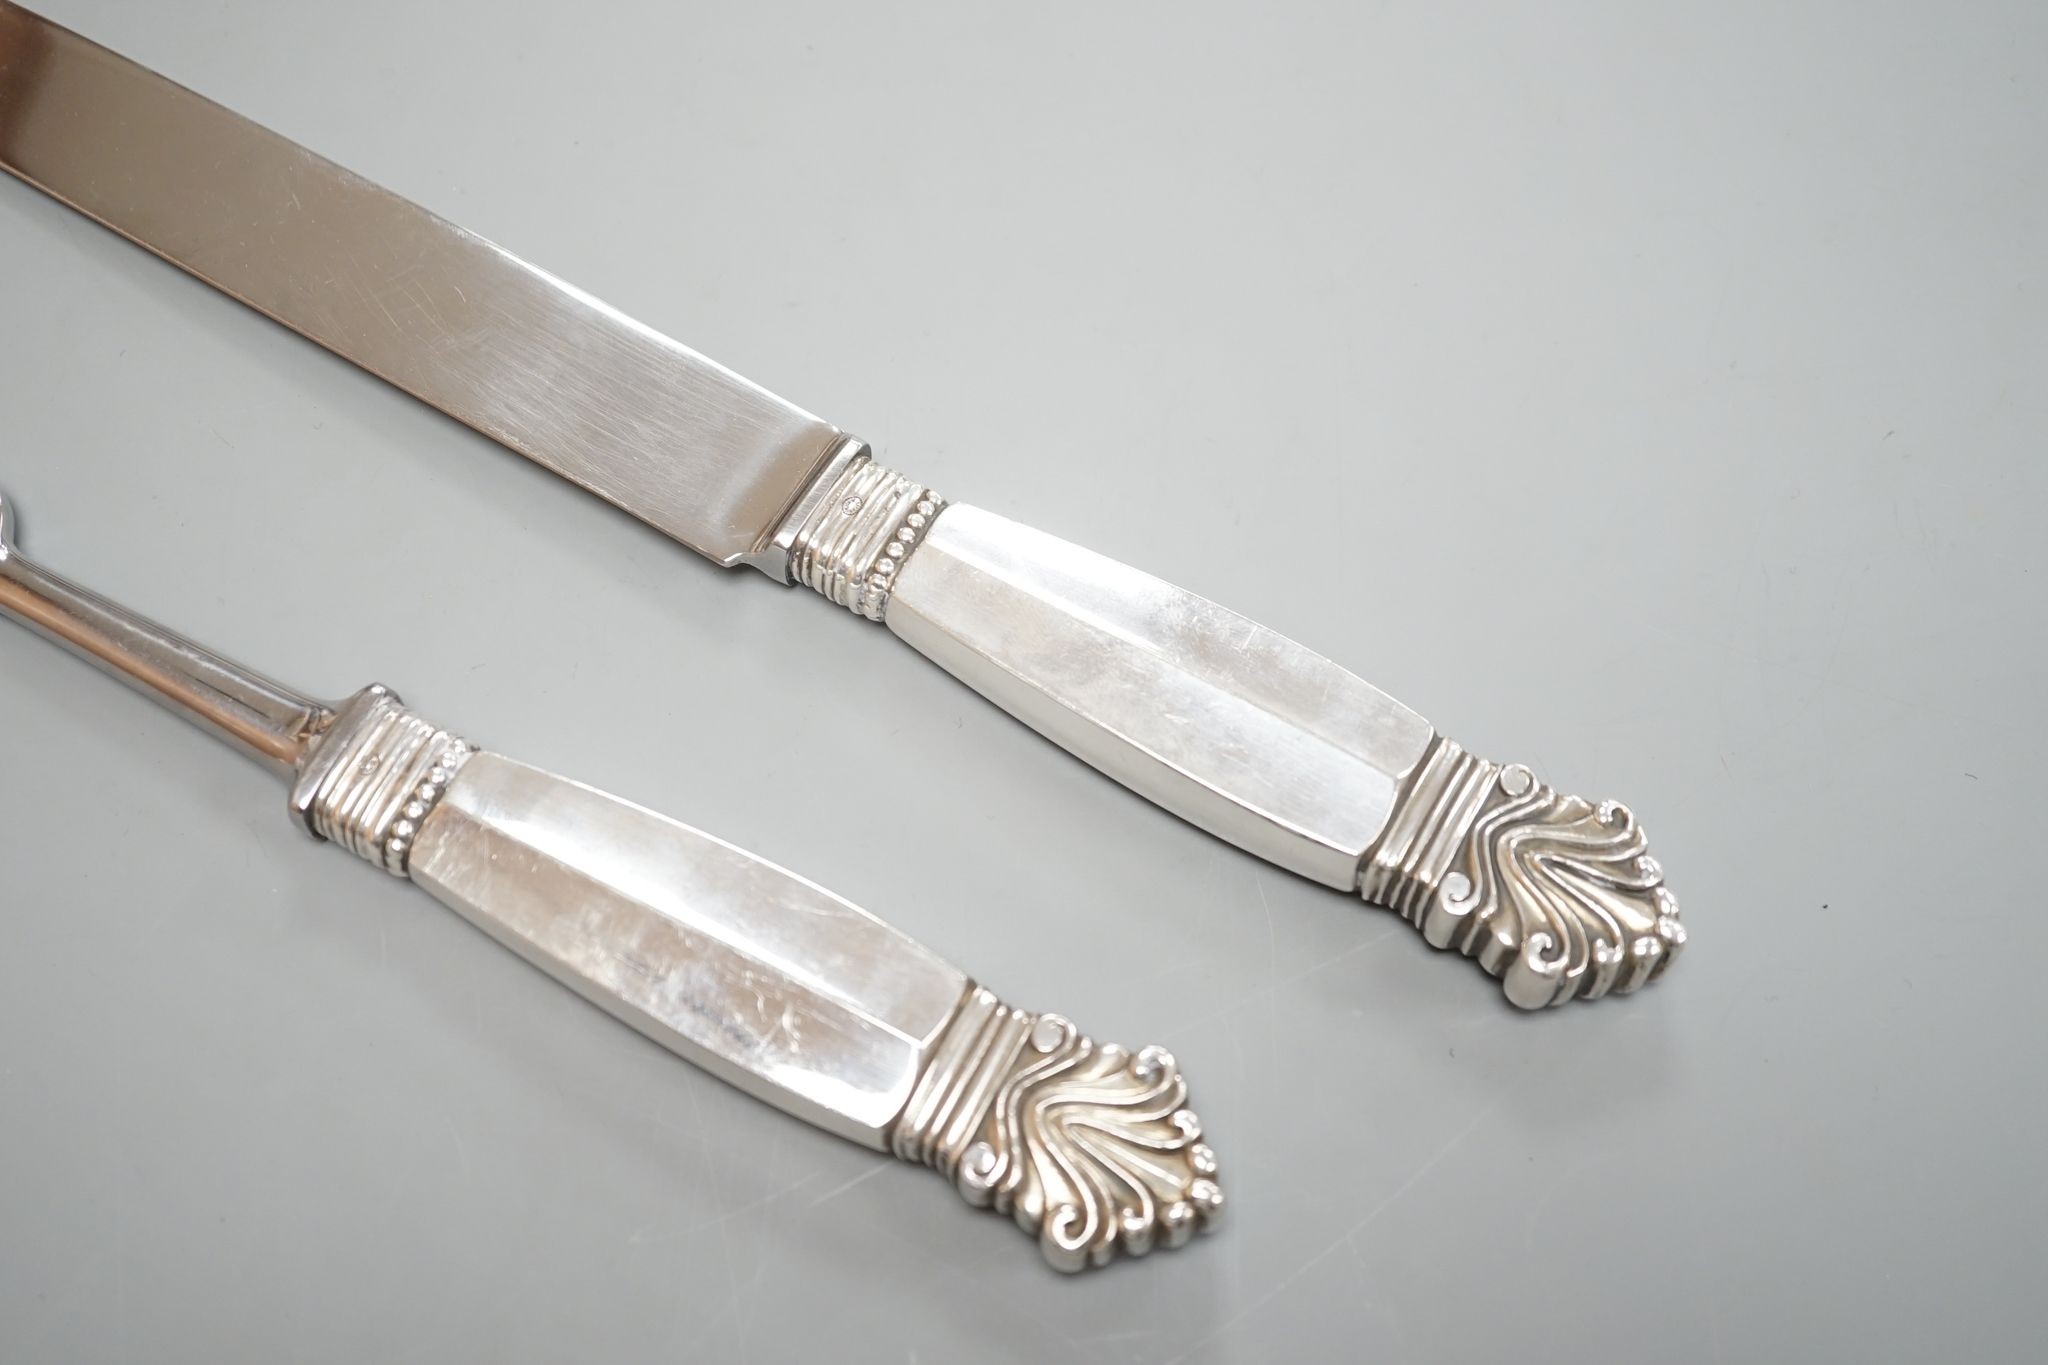 A pair of Georg Jensen sterling handled carving knife and fork, knife 34.4cm.